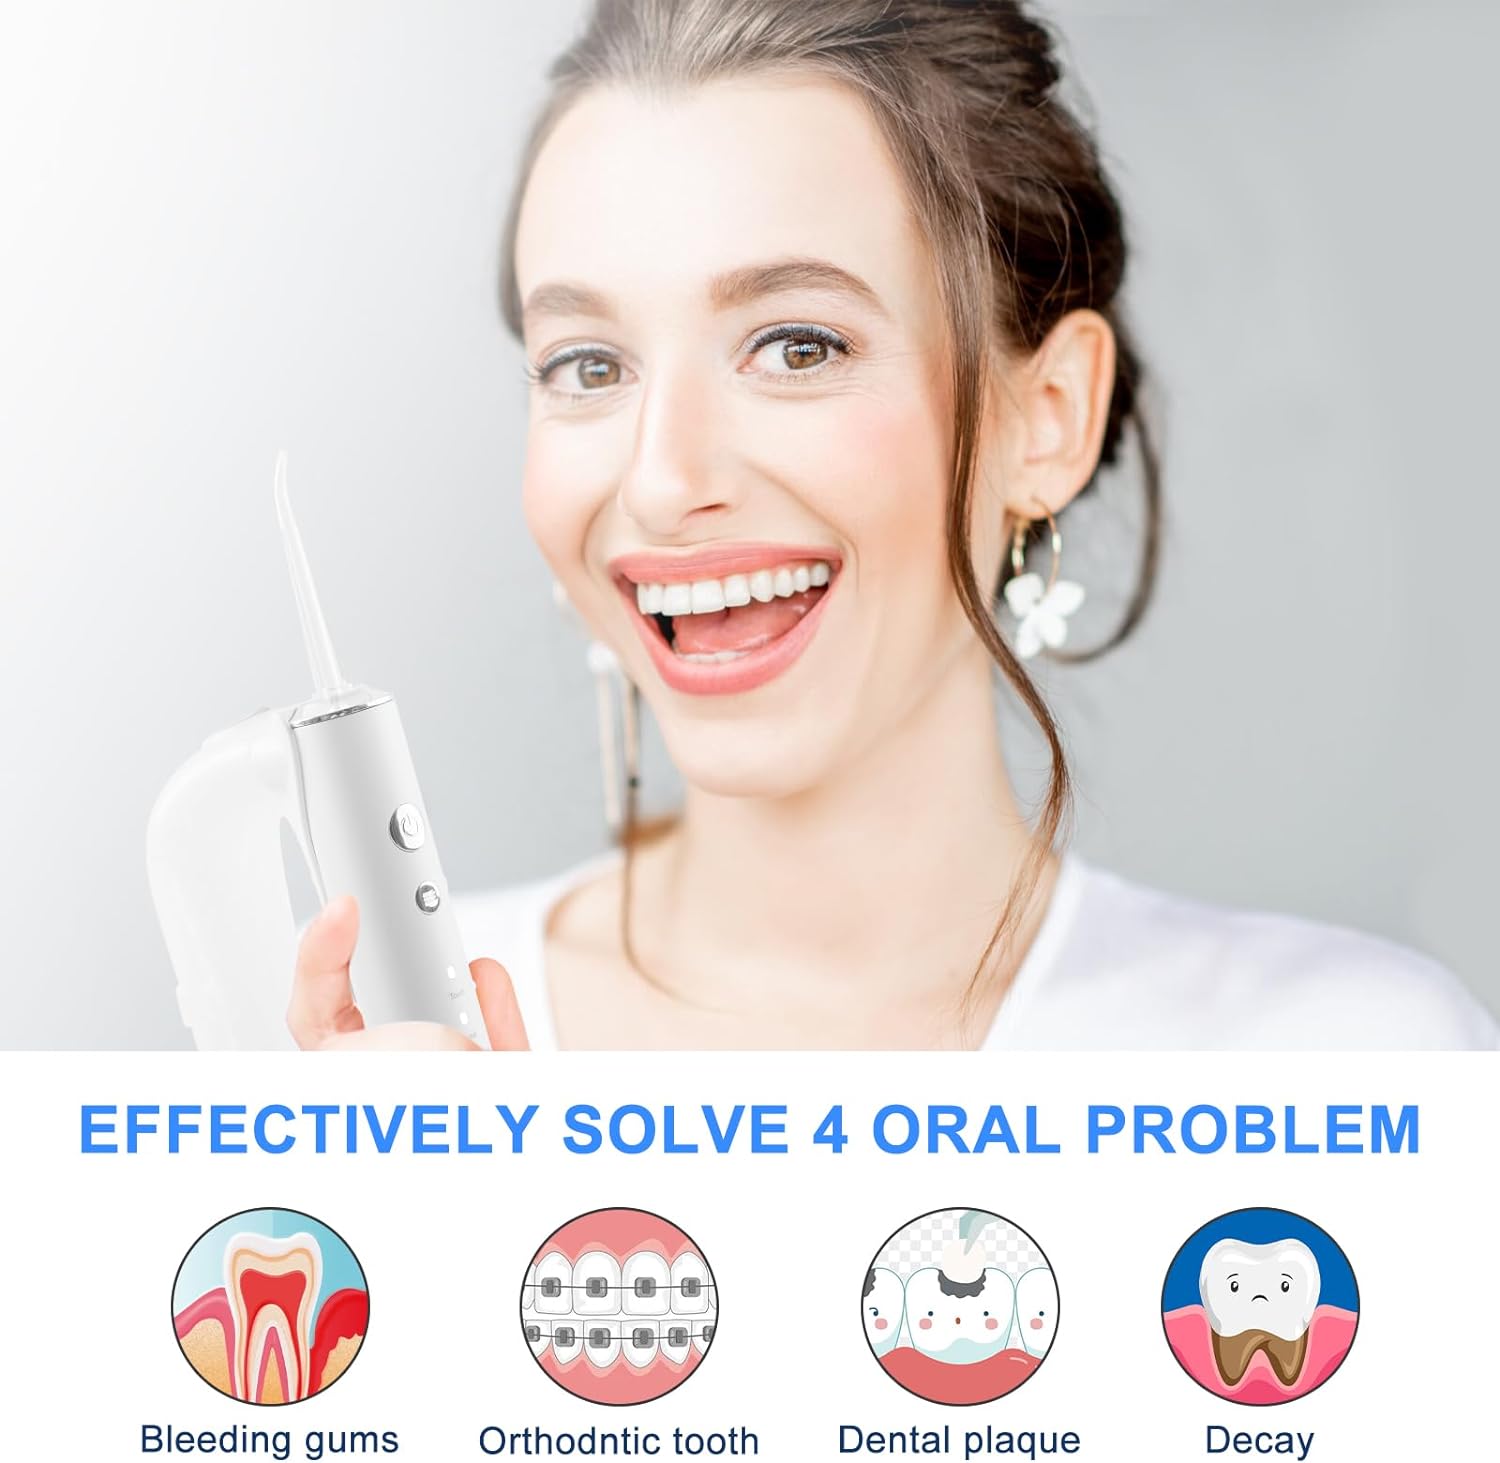 Water Dental Flosser with Electric Toothbrush- Hotodeal Cordless Rechargeable Oral Irrigator with 300ML Detachable Tank